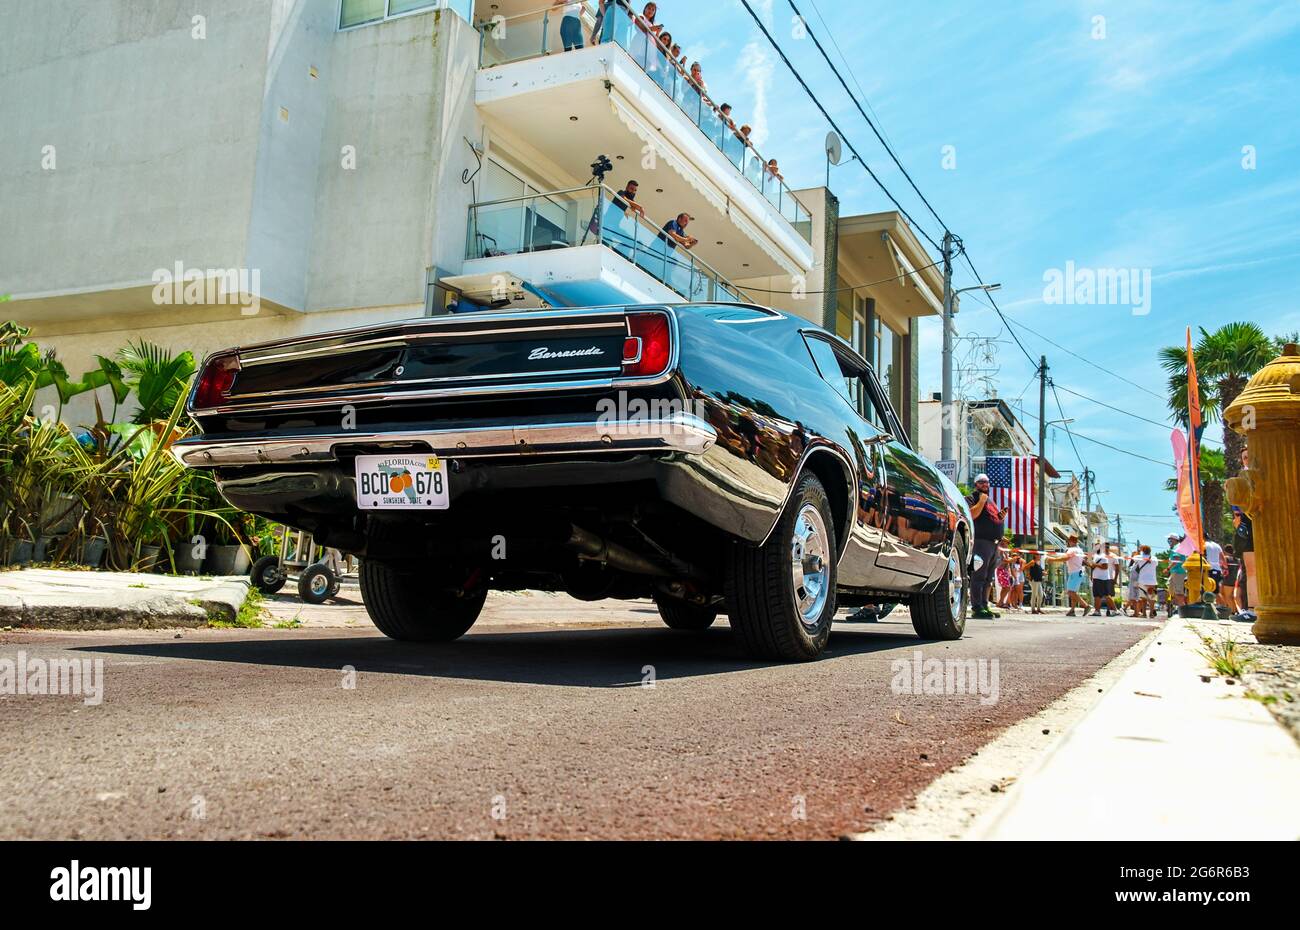 Thessaloniki, Greece - July 6, 2021: Muscle car Plymouth Barracuda on a shooting stage during production of new movie The Enforcer in Greece, Thessalo Stock Photo